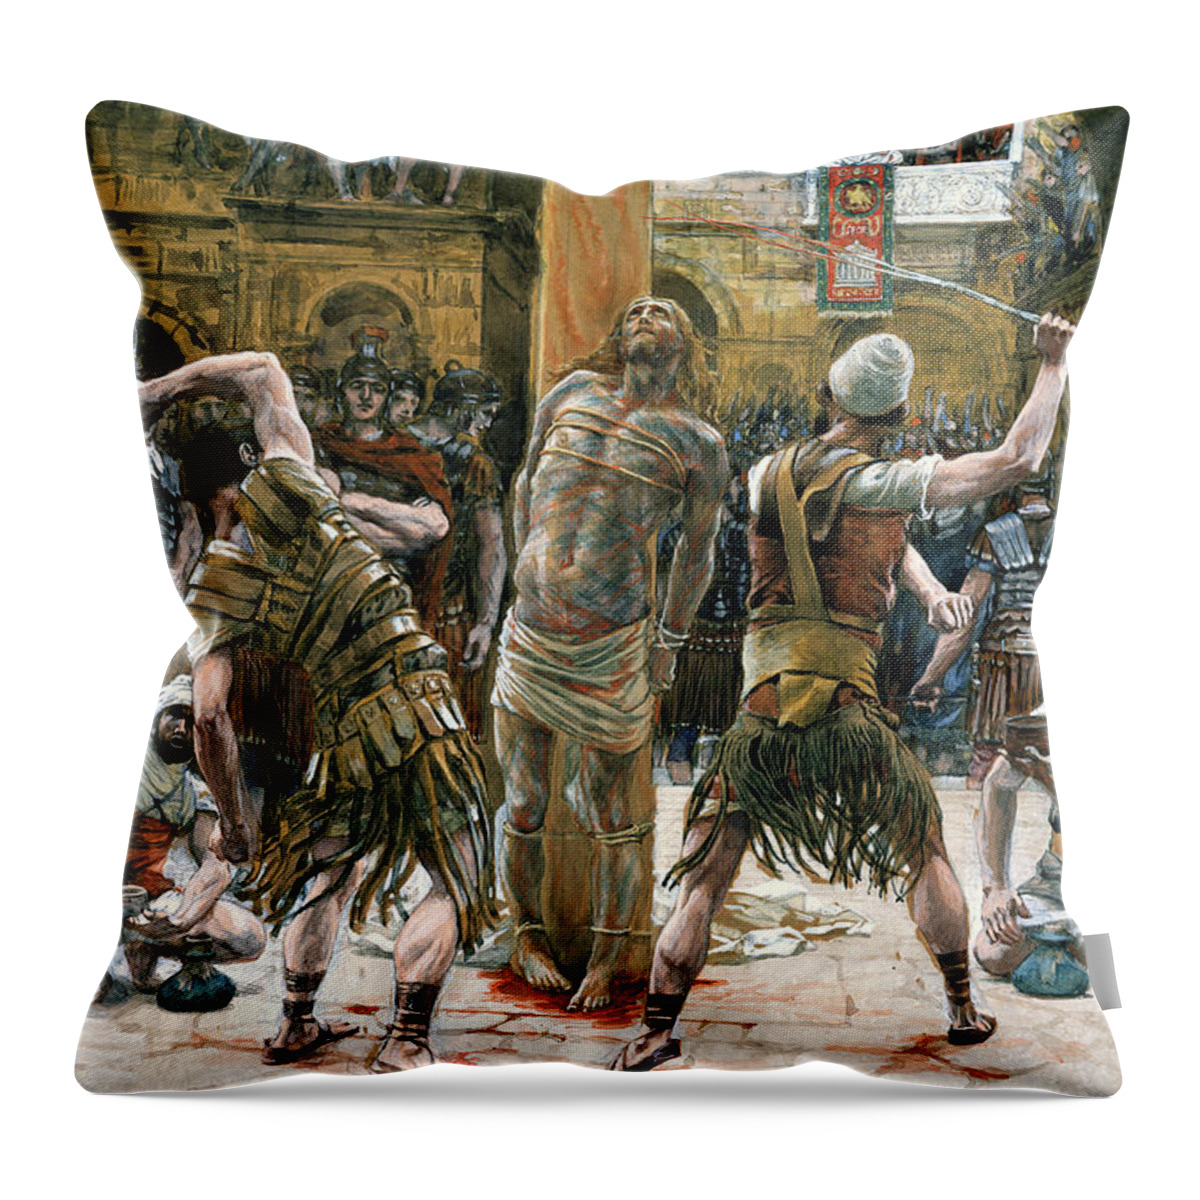 Whips Throw Pillow featuring the painting The Scourging by Tissot